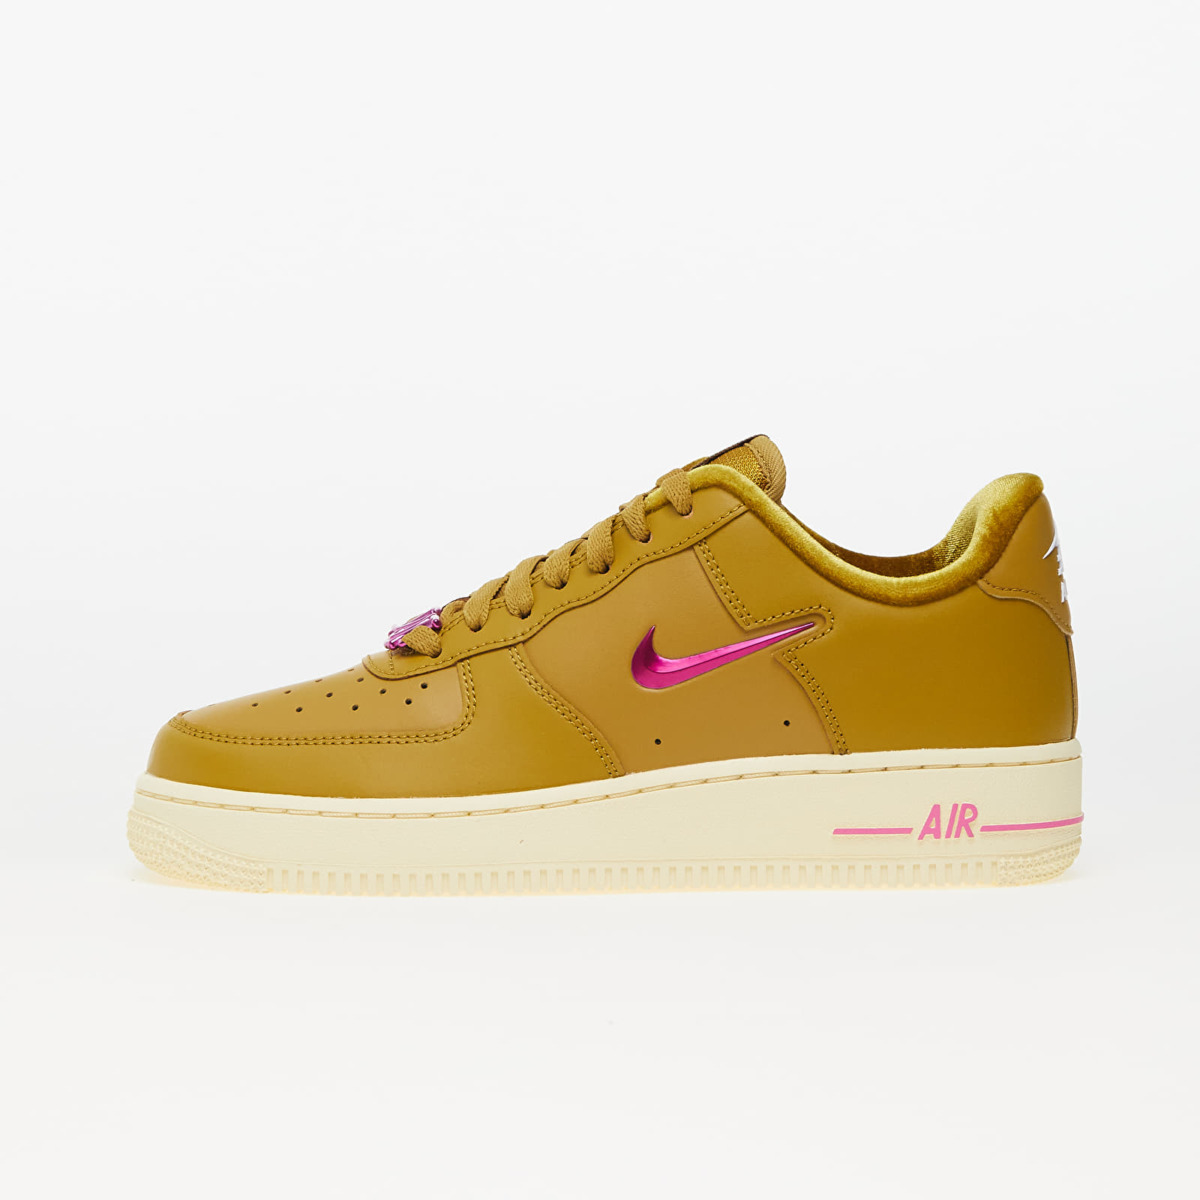 Nike - Air Force in Pink for Women from Footshop GOOFASH